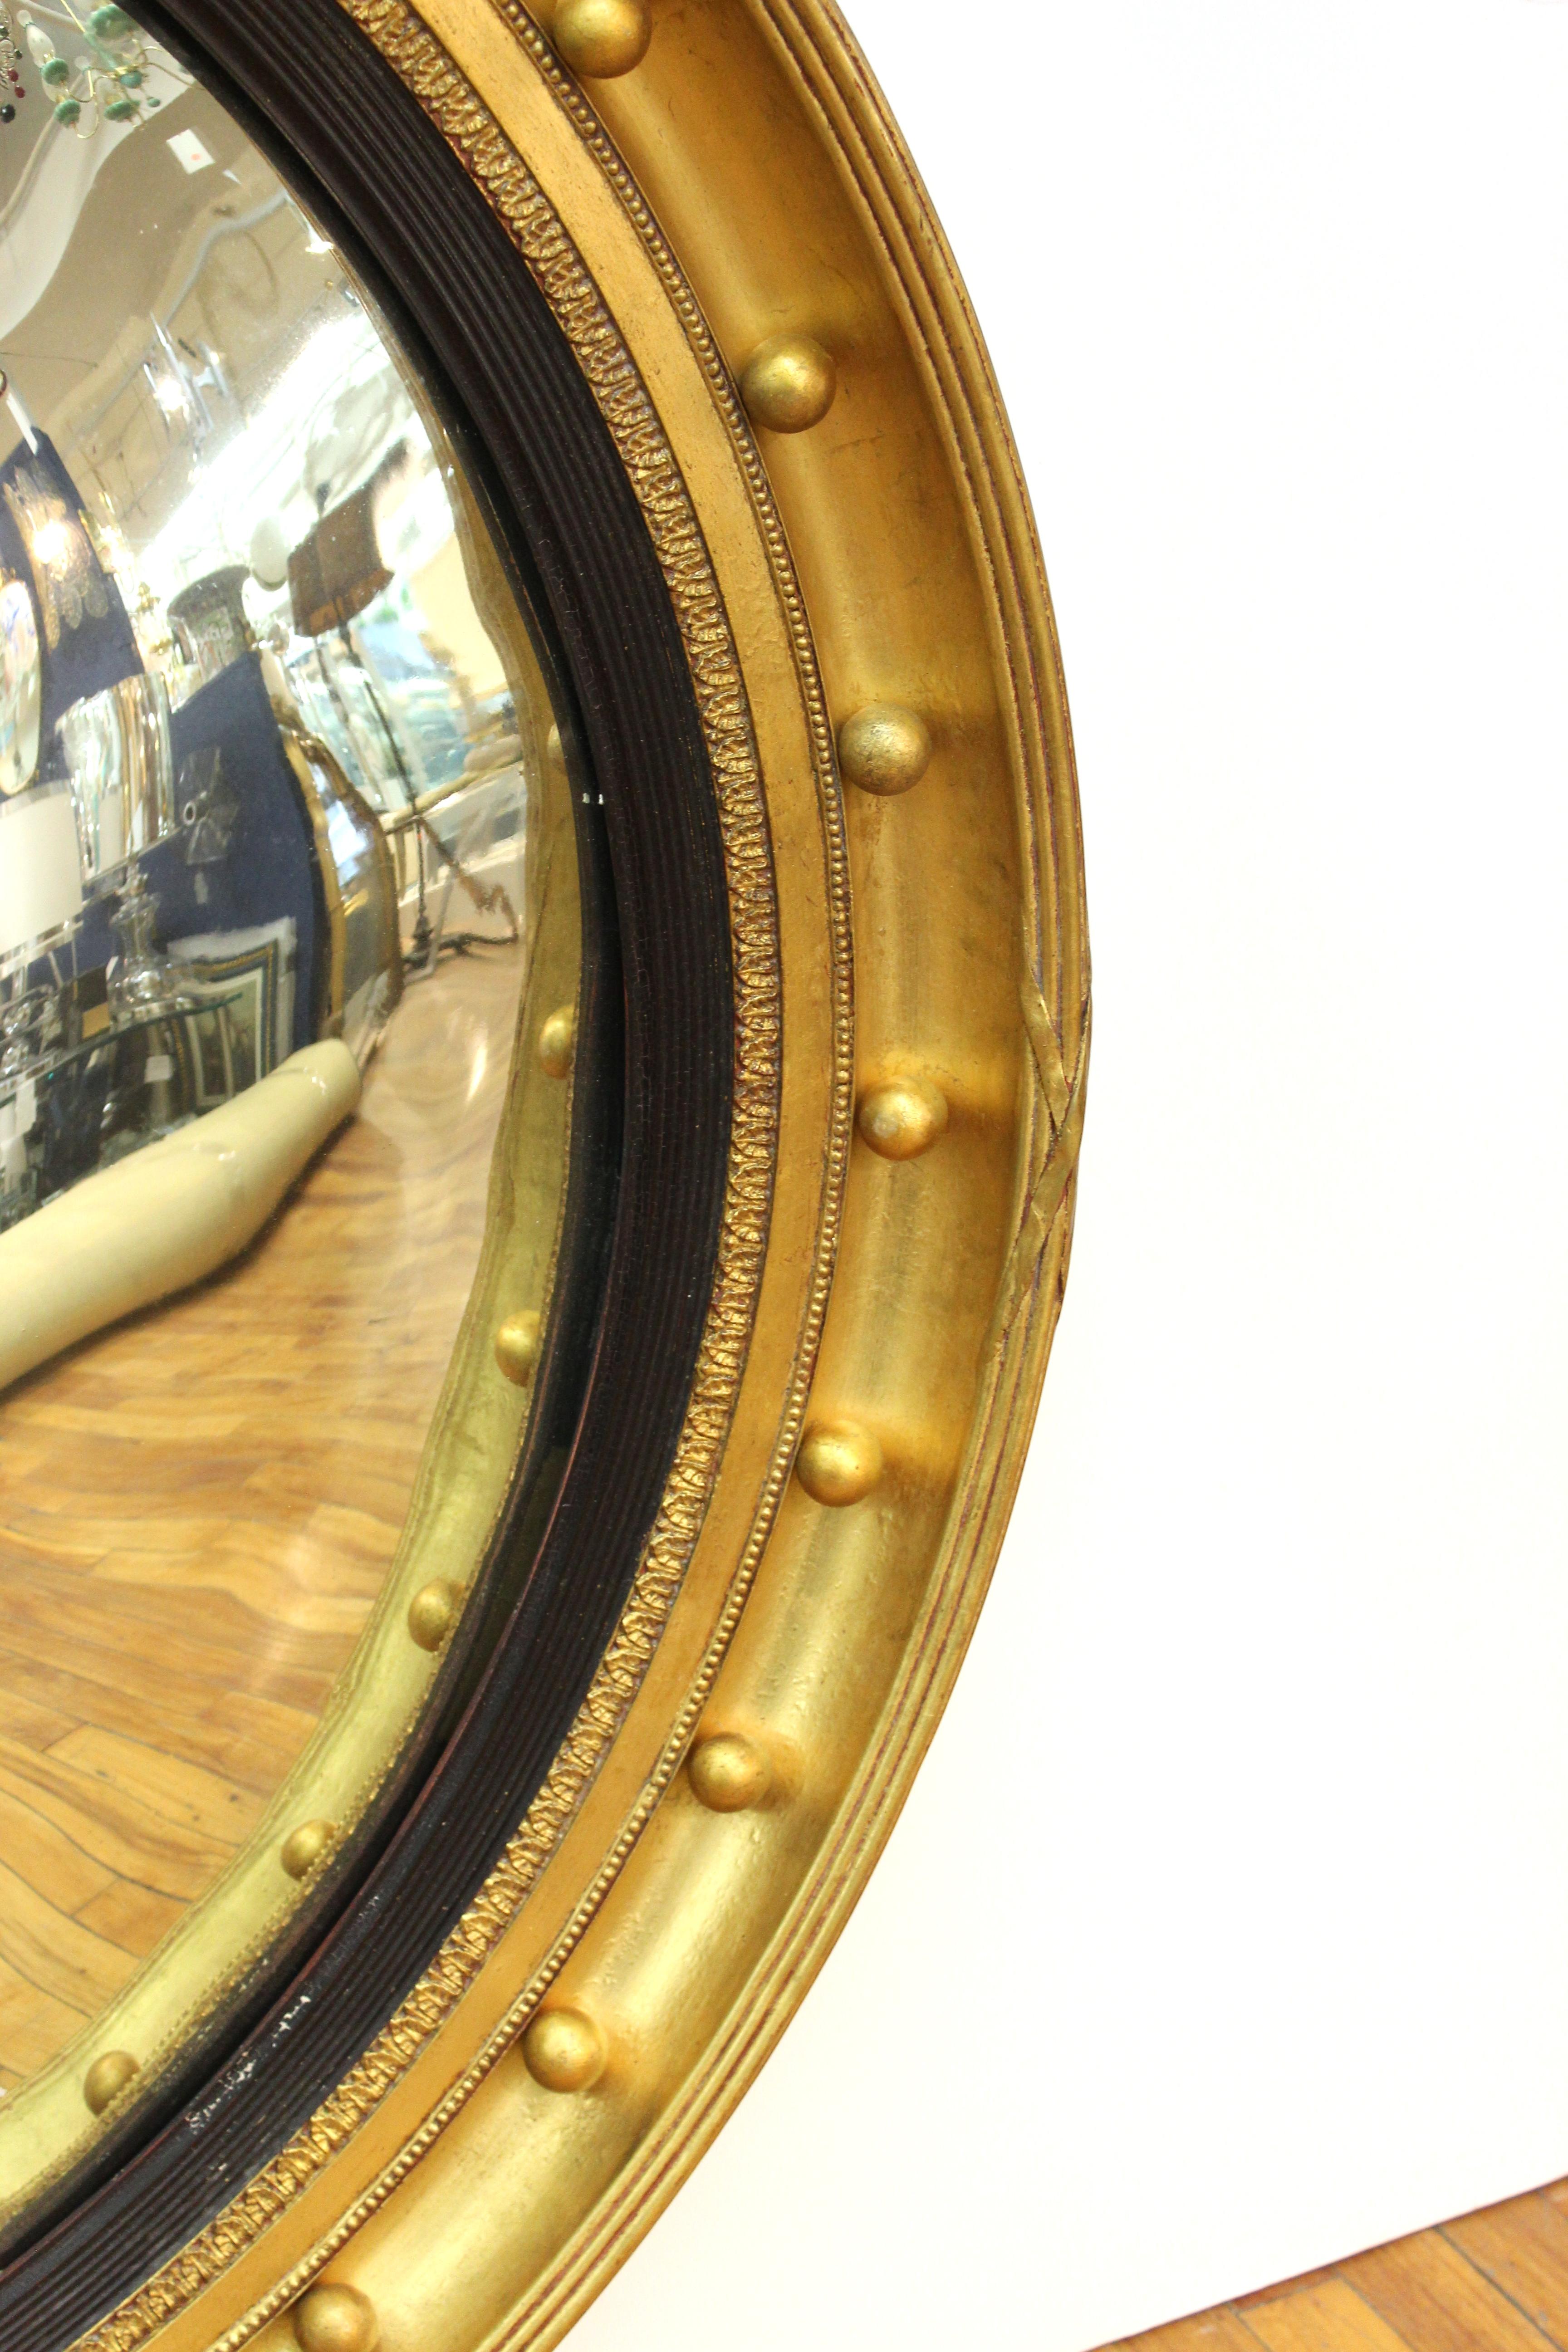 20th Century American Federal Style Monumental Convex Wall Mirrors